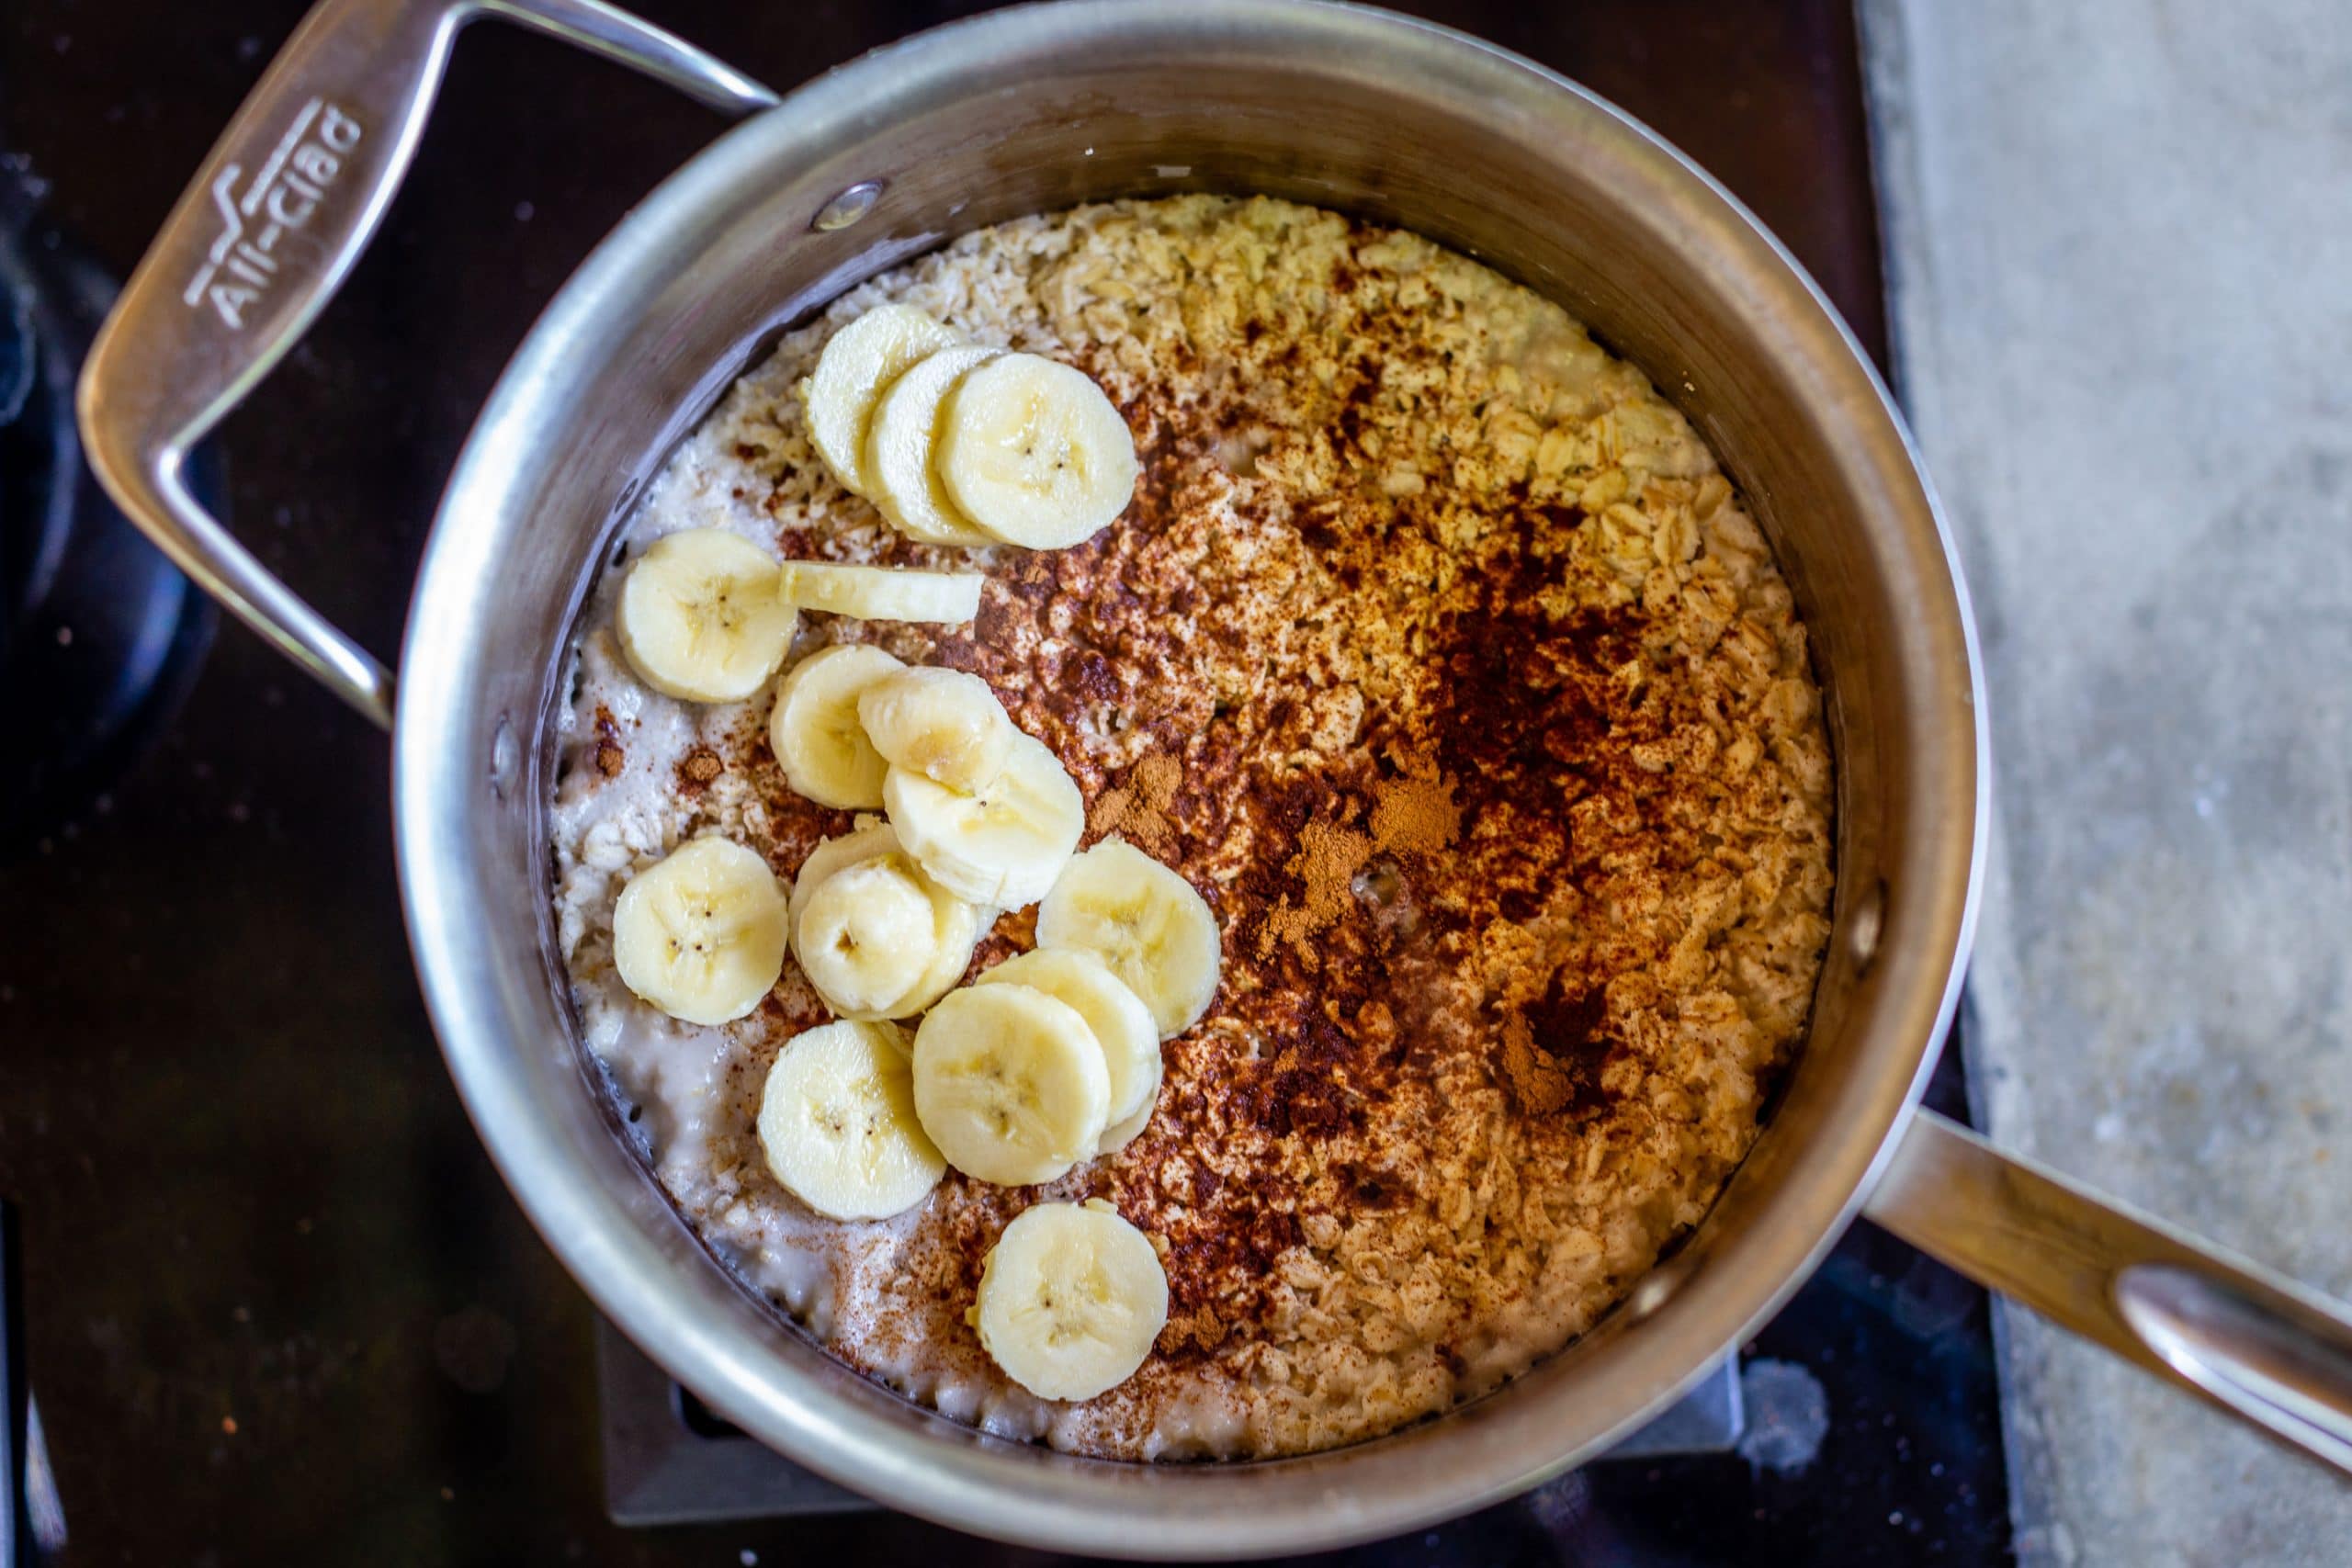 Oatmeal with Almond Milk Ingredients